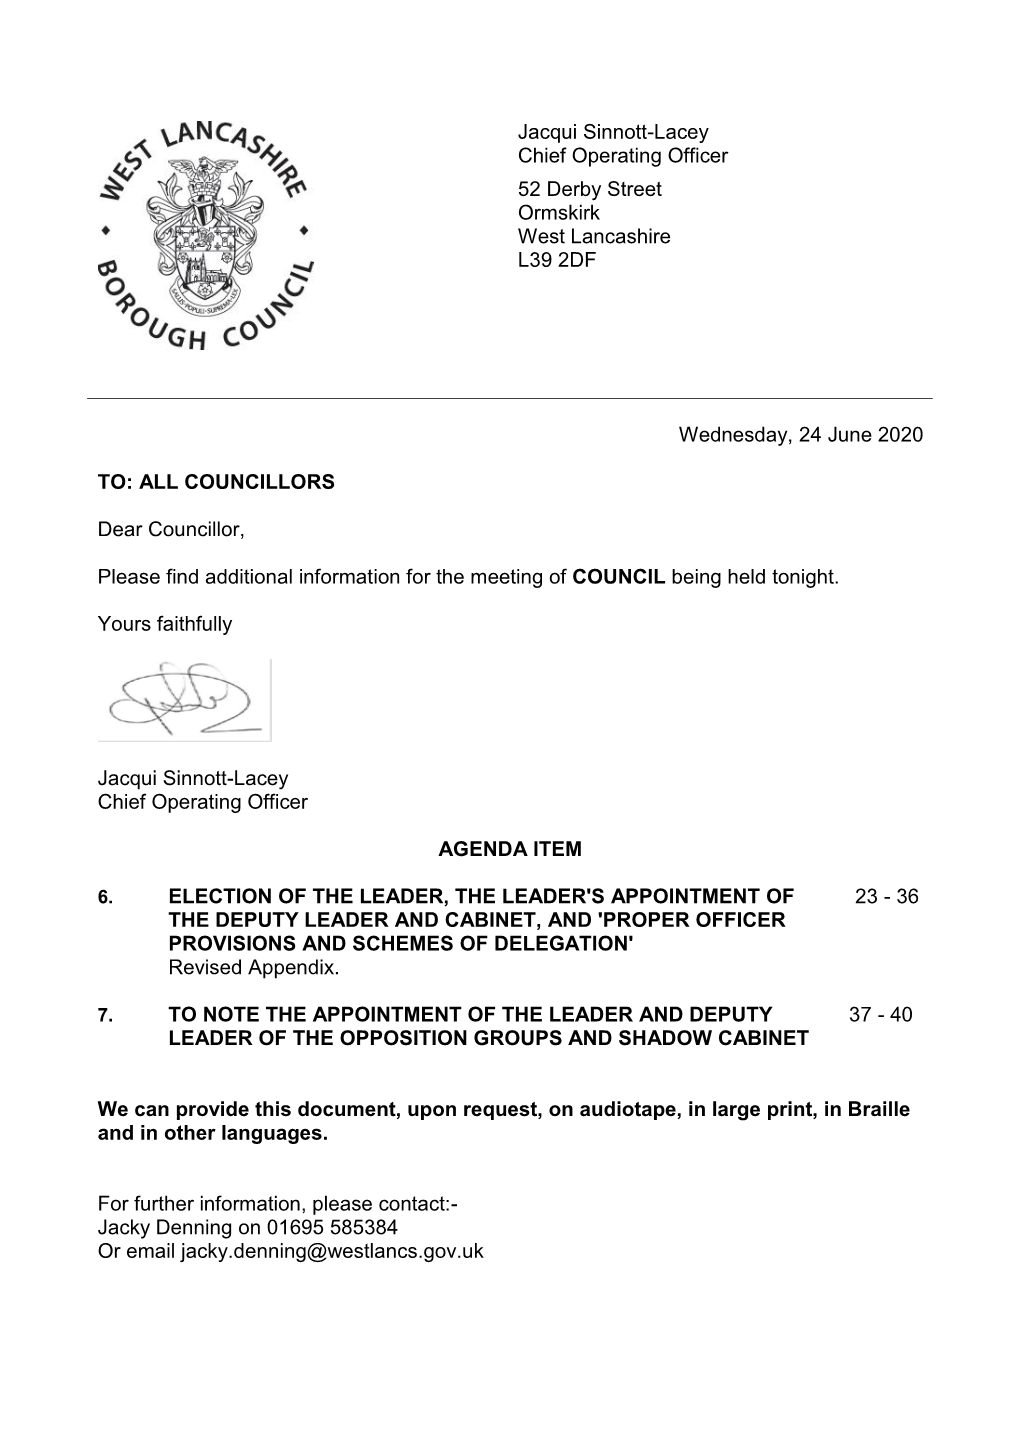 LATE INFORMATION Agenda Supplement for Council, 24/06